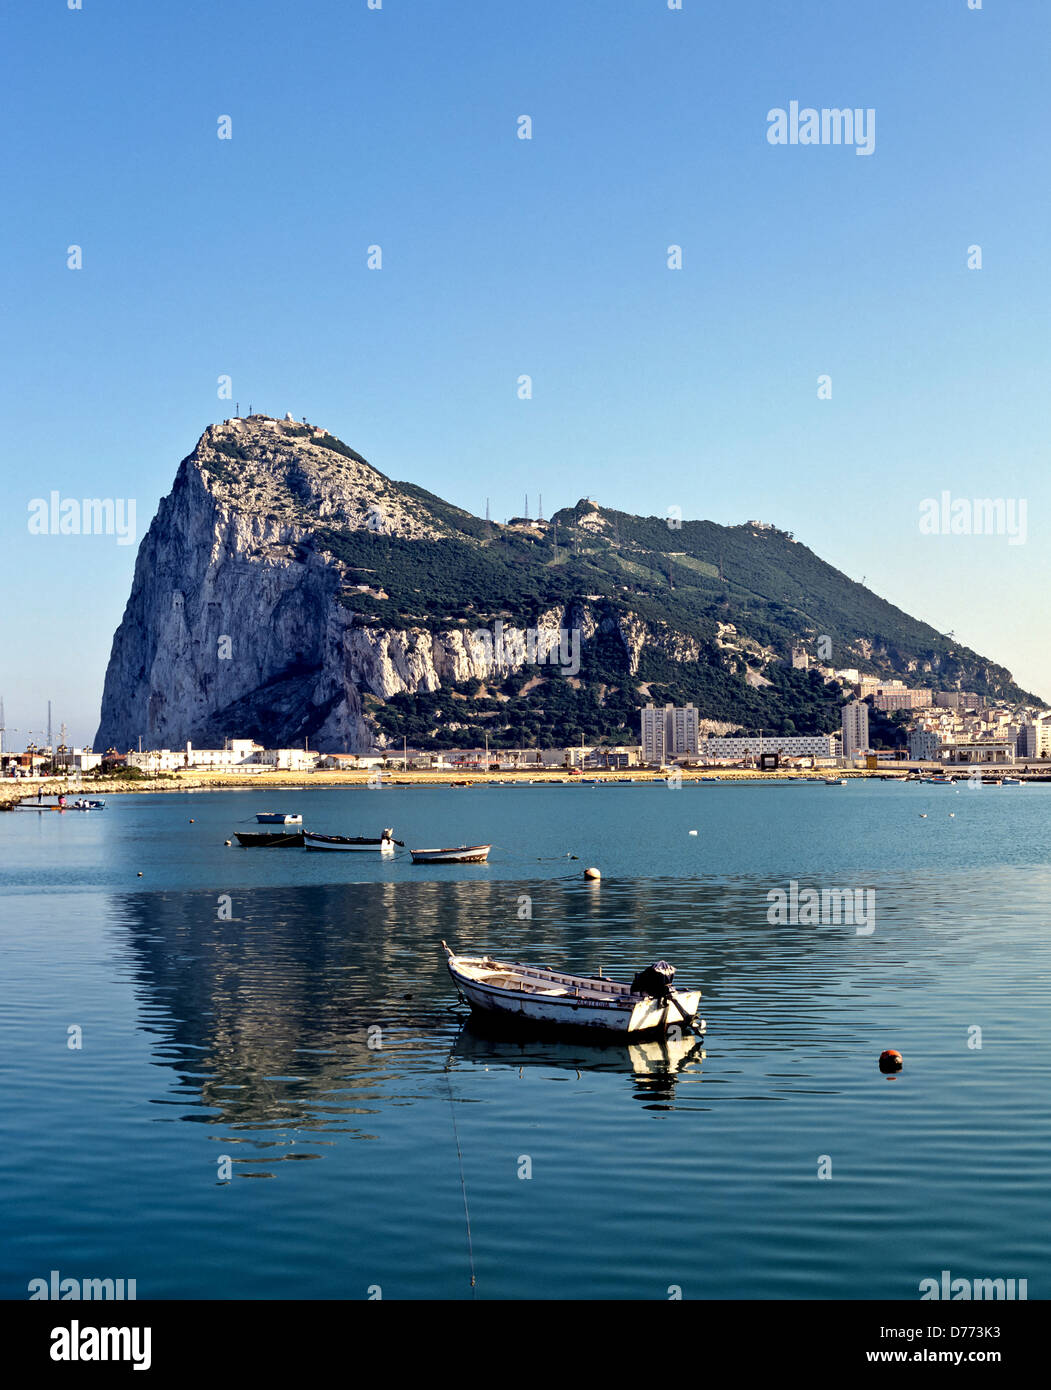 8703. The Rock from La Linea in Spain, Gibraltar, Europe Stock Photo